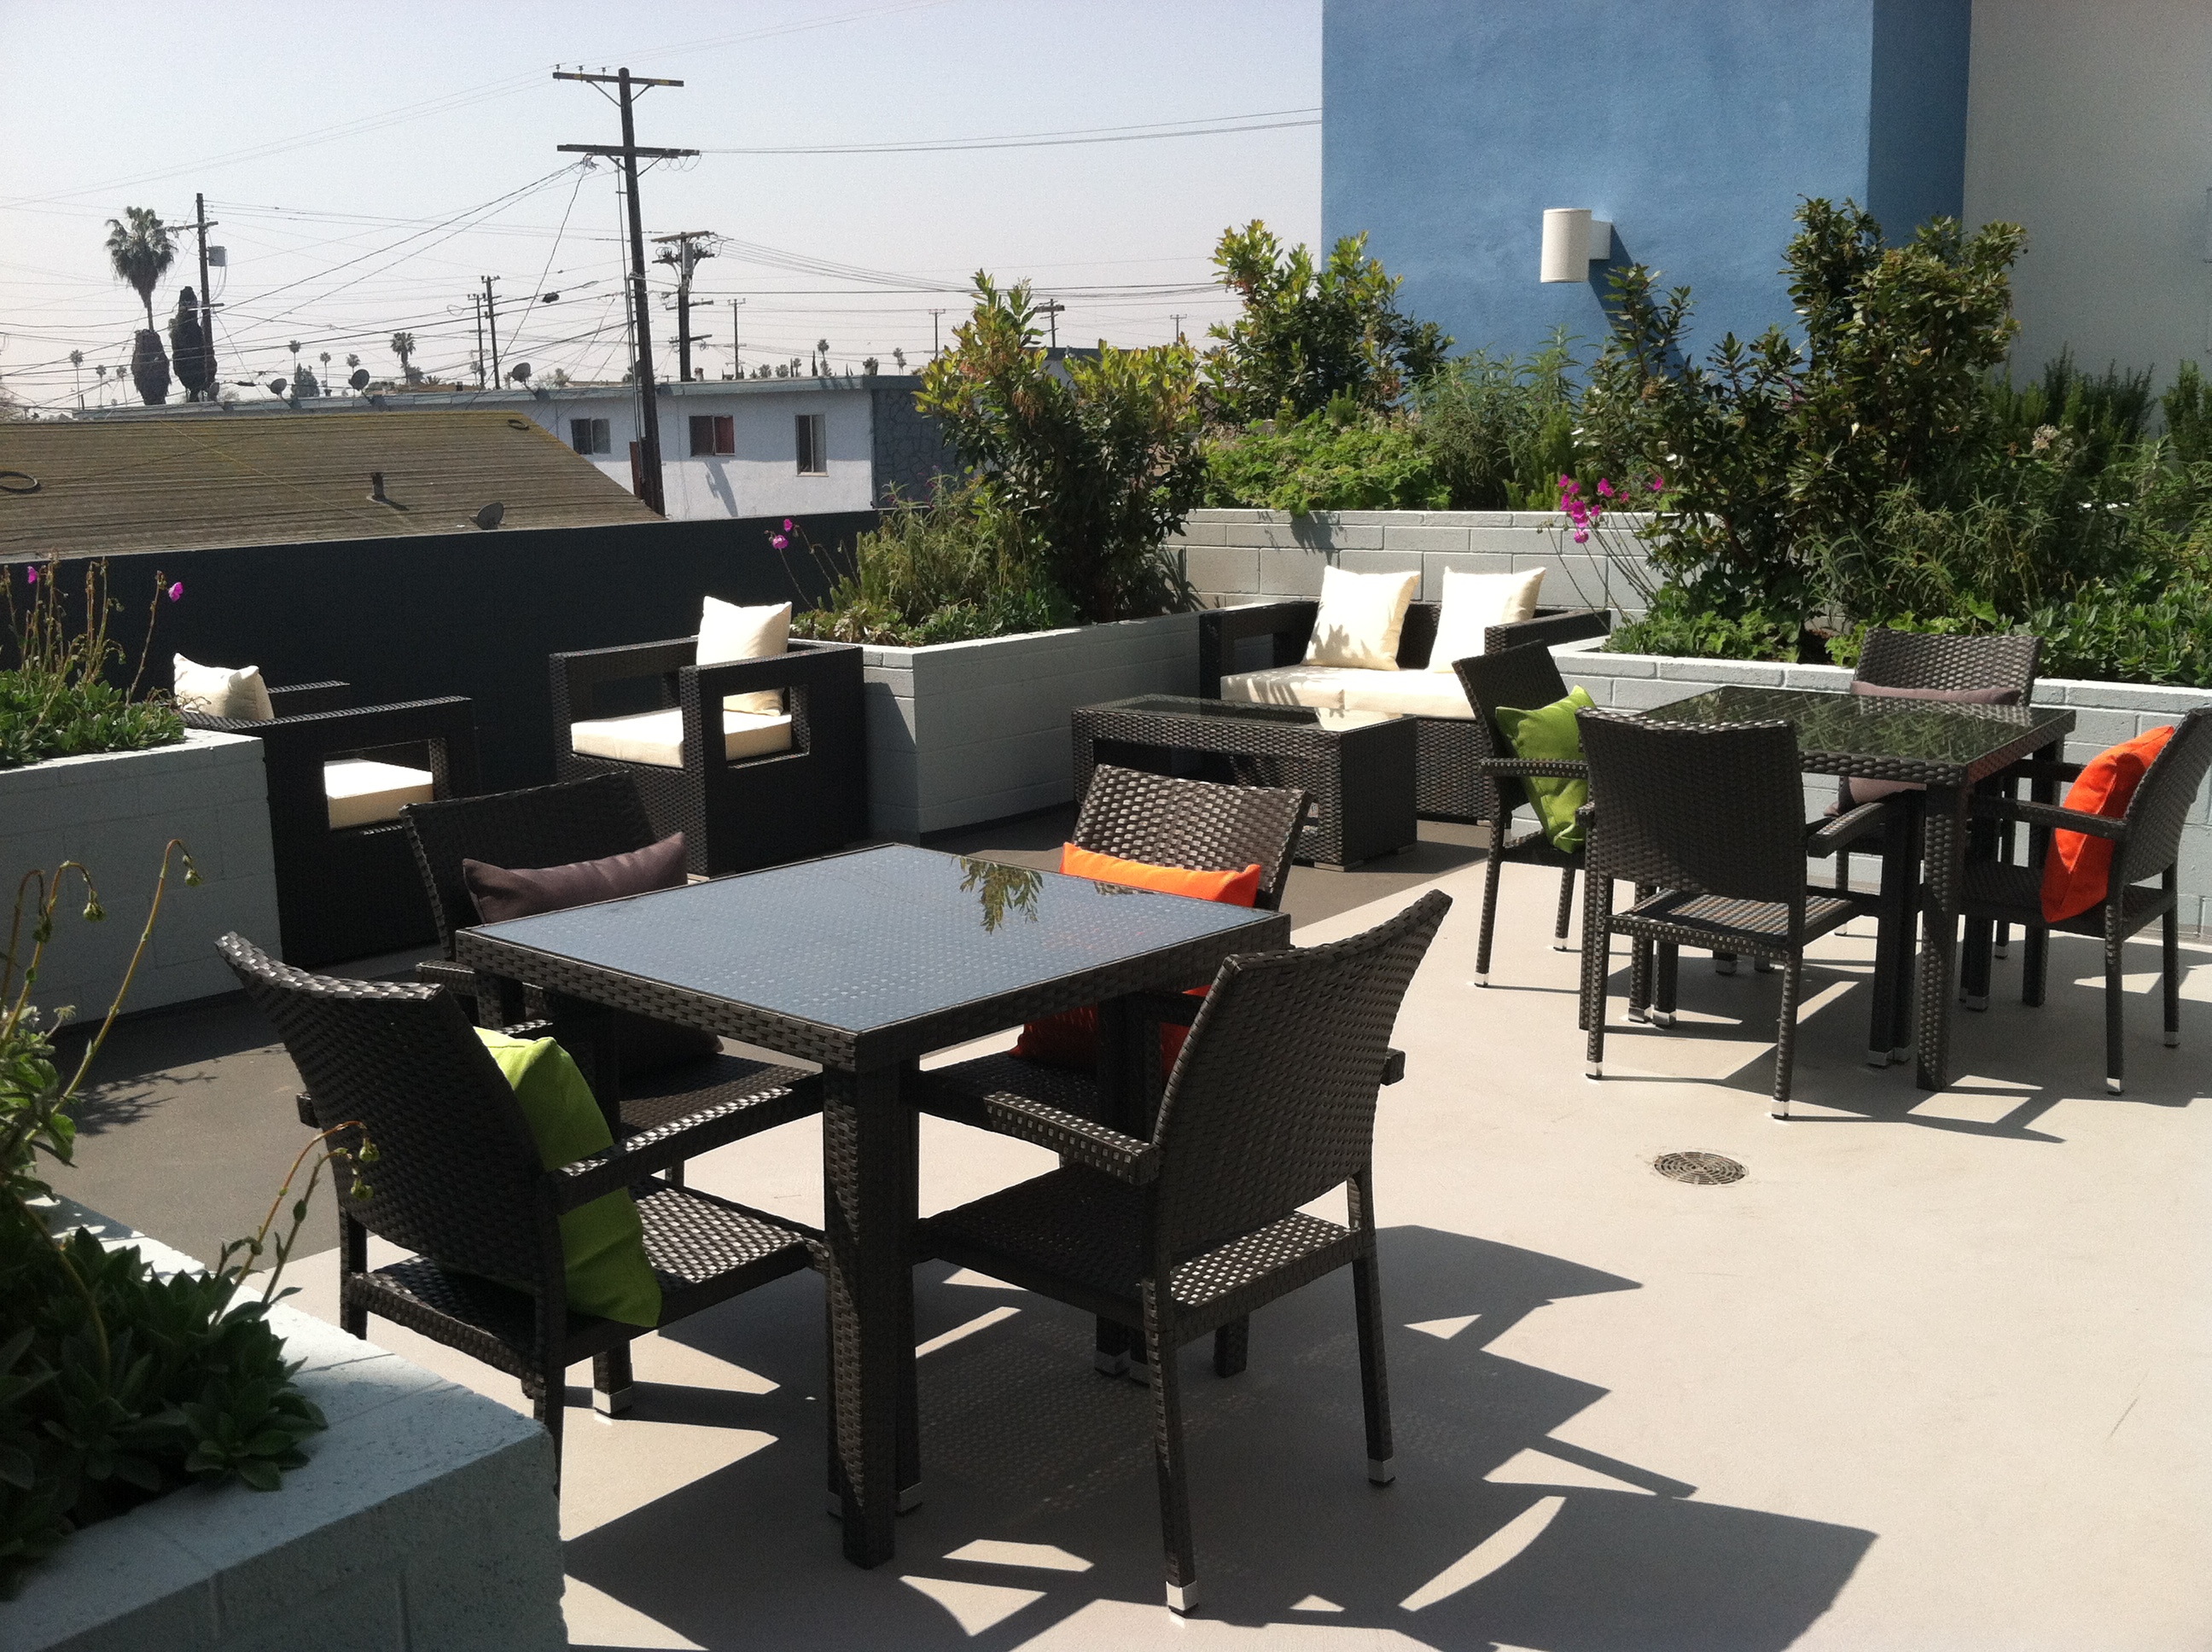 Rooftop lounging area. It has multiple chairs and tables. There is also various plants surrounding the seating areas.